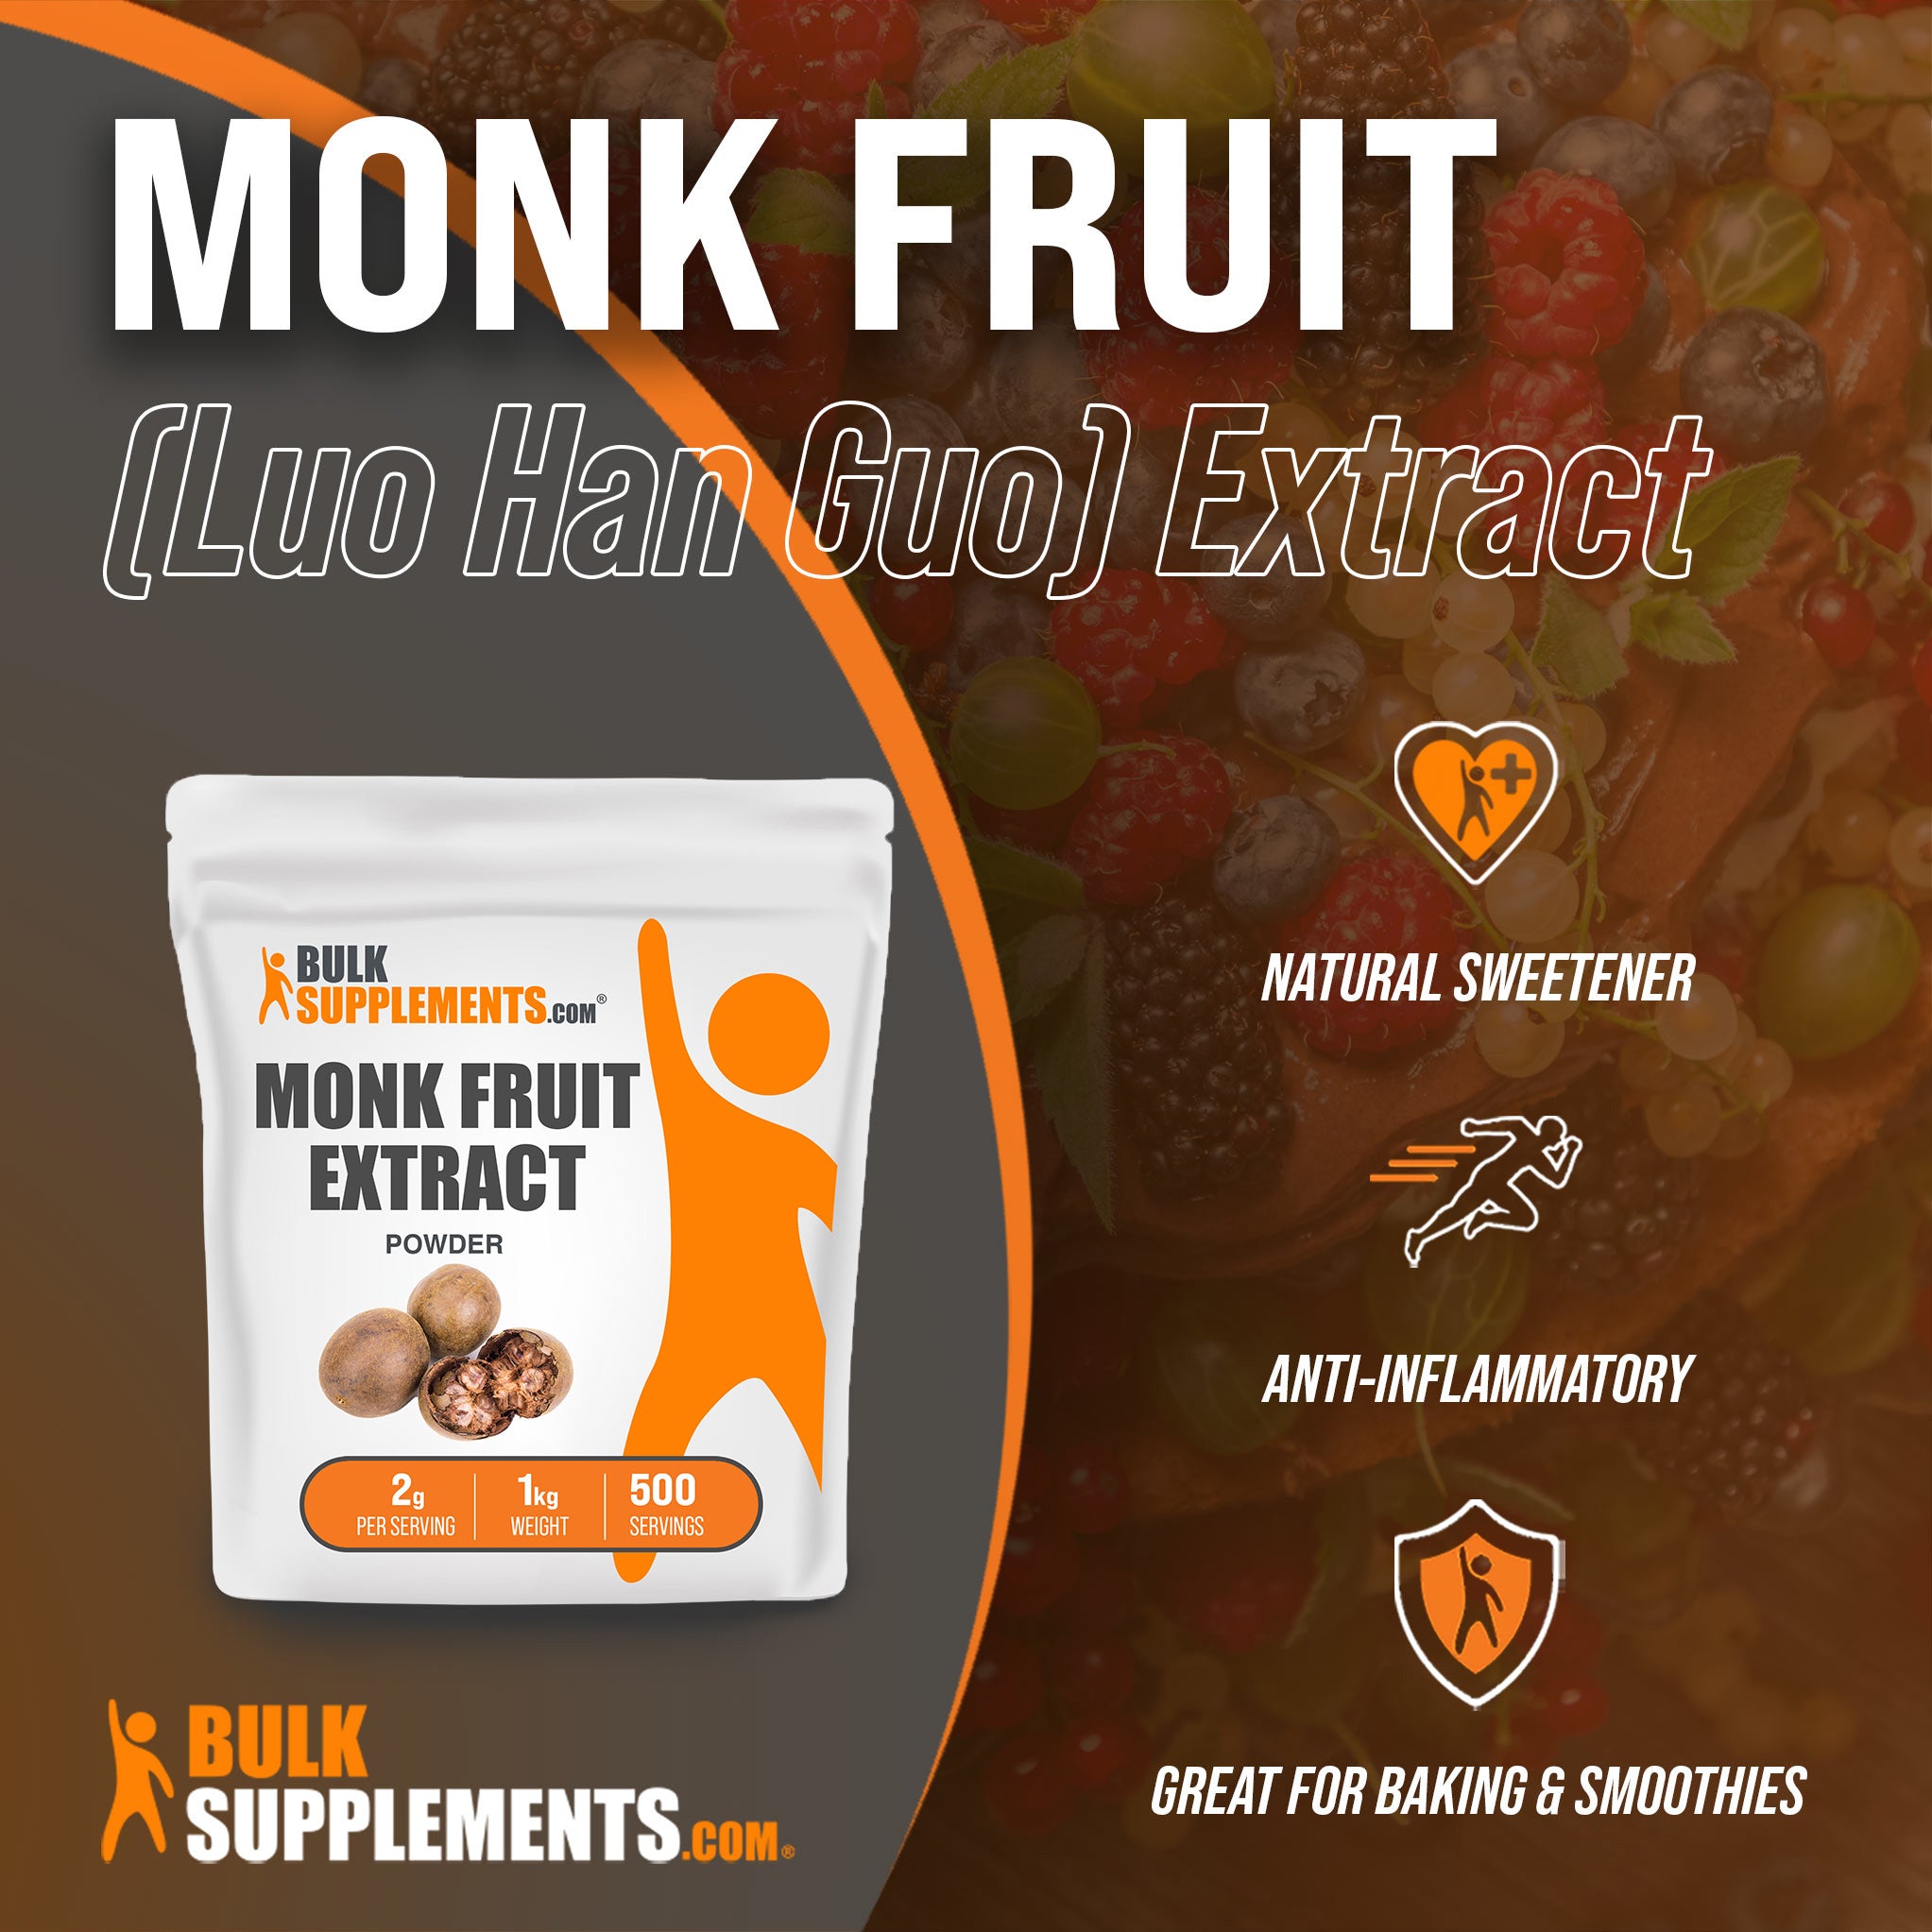 Benefits of Monk Fruit Extract: natural sweetener, anti-inflammatory, great for baking and smoothies